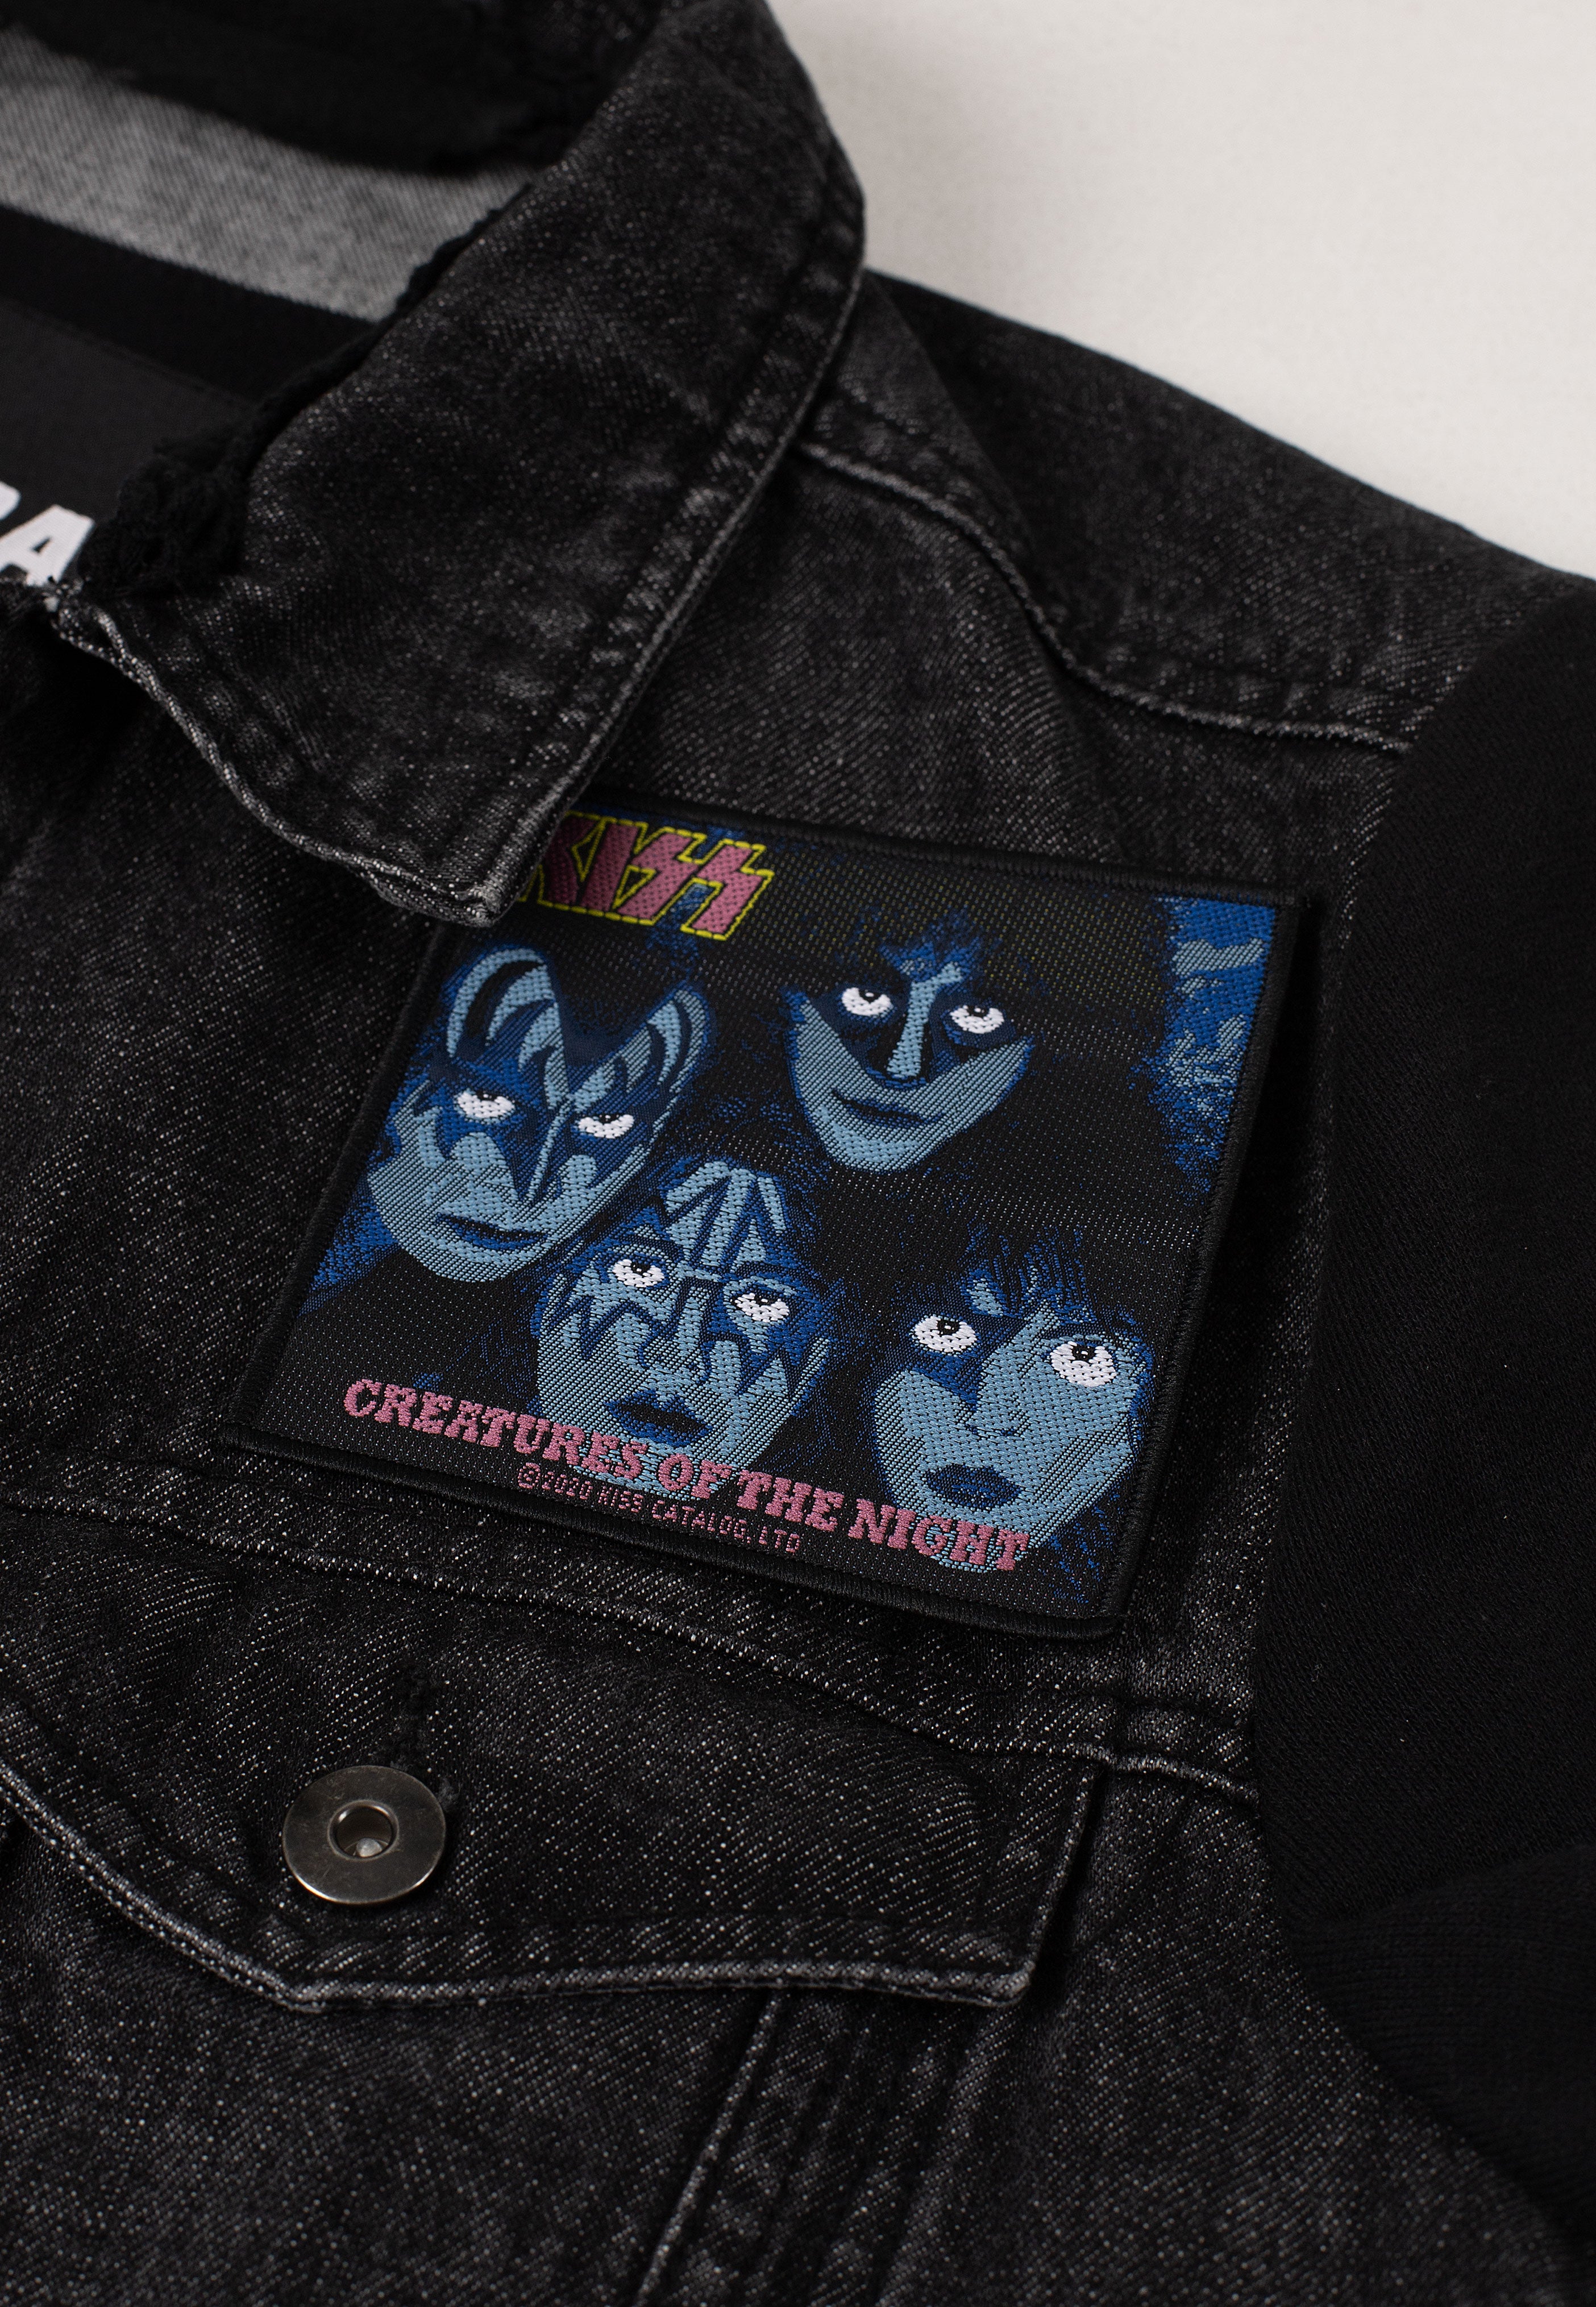 Kiss - Creatures Of The Night - Patch